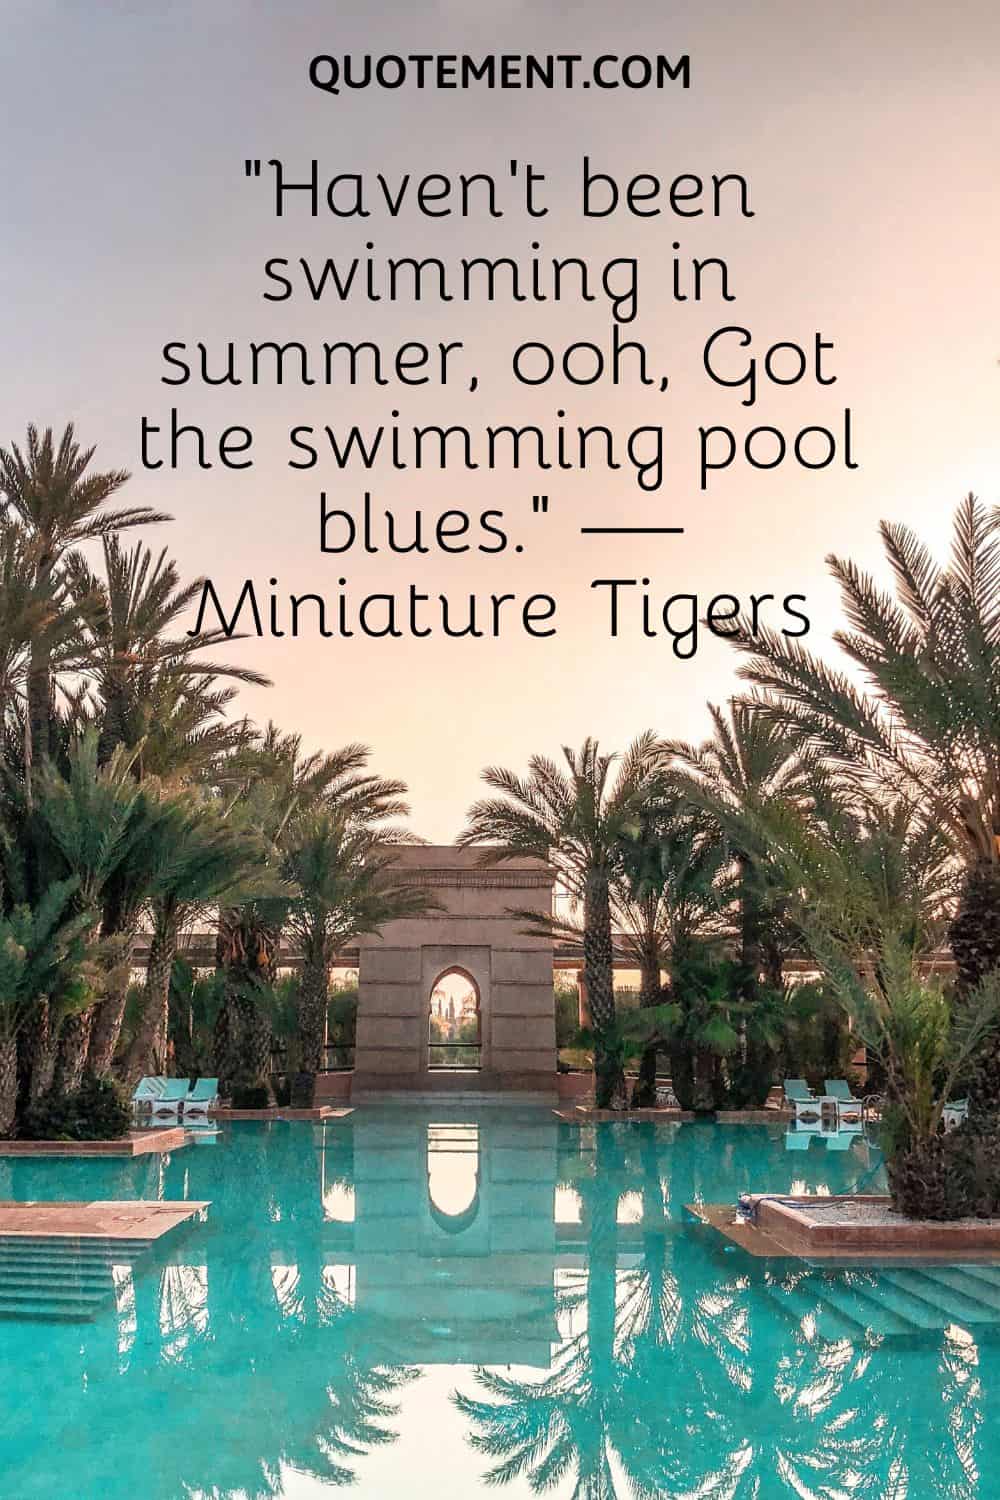 “Haven’t been swimming in summer, ooh, Got the swimming pool blues.” — Miniature Tigers